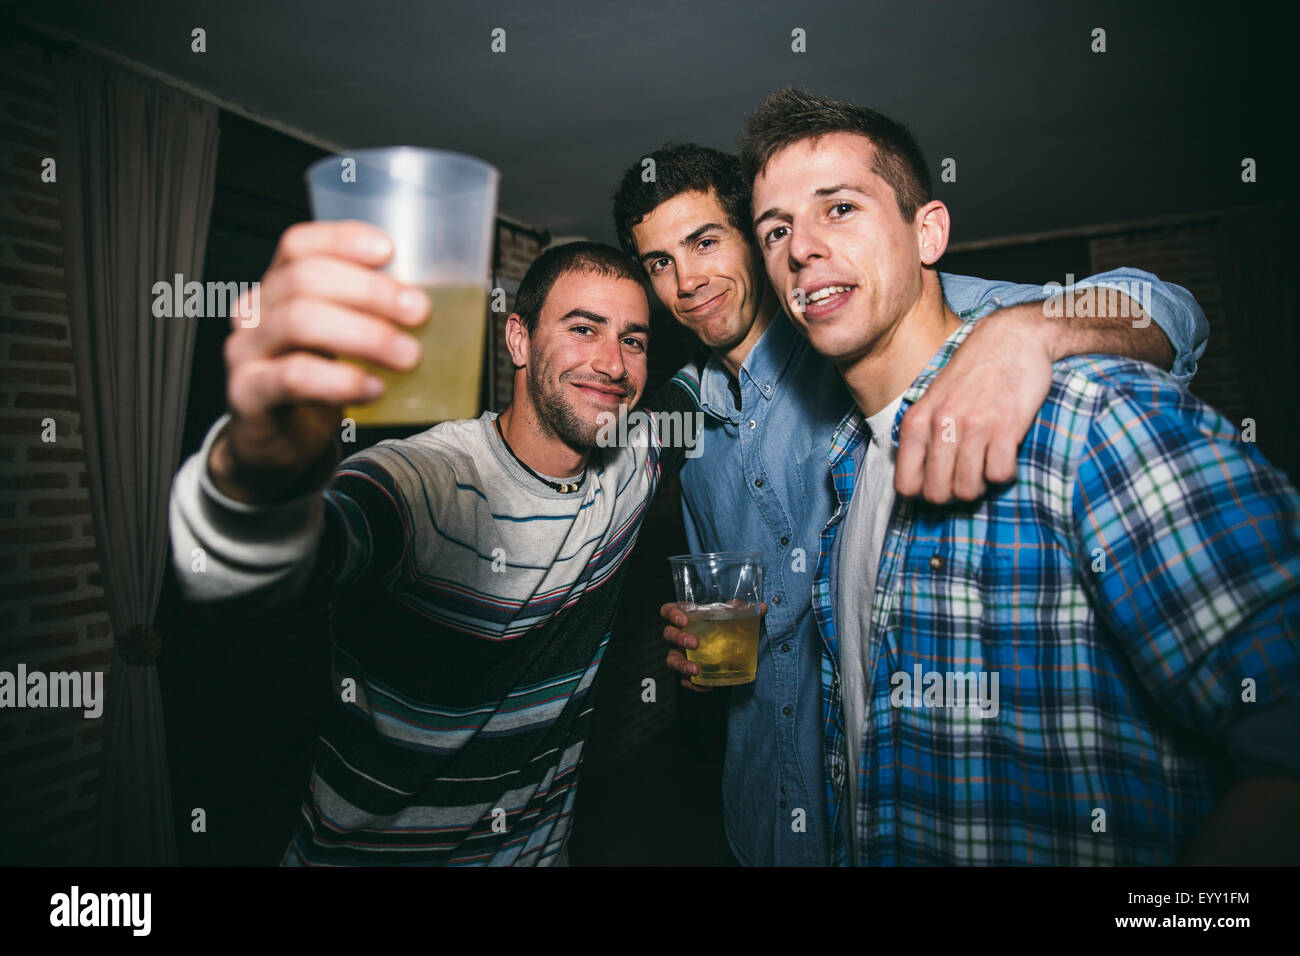 Smiling men drinking in nightclub Banque D'Images